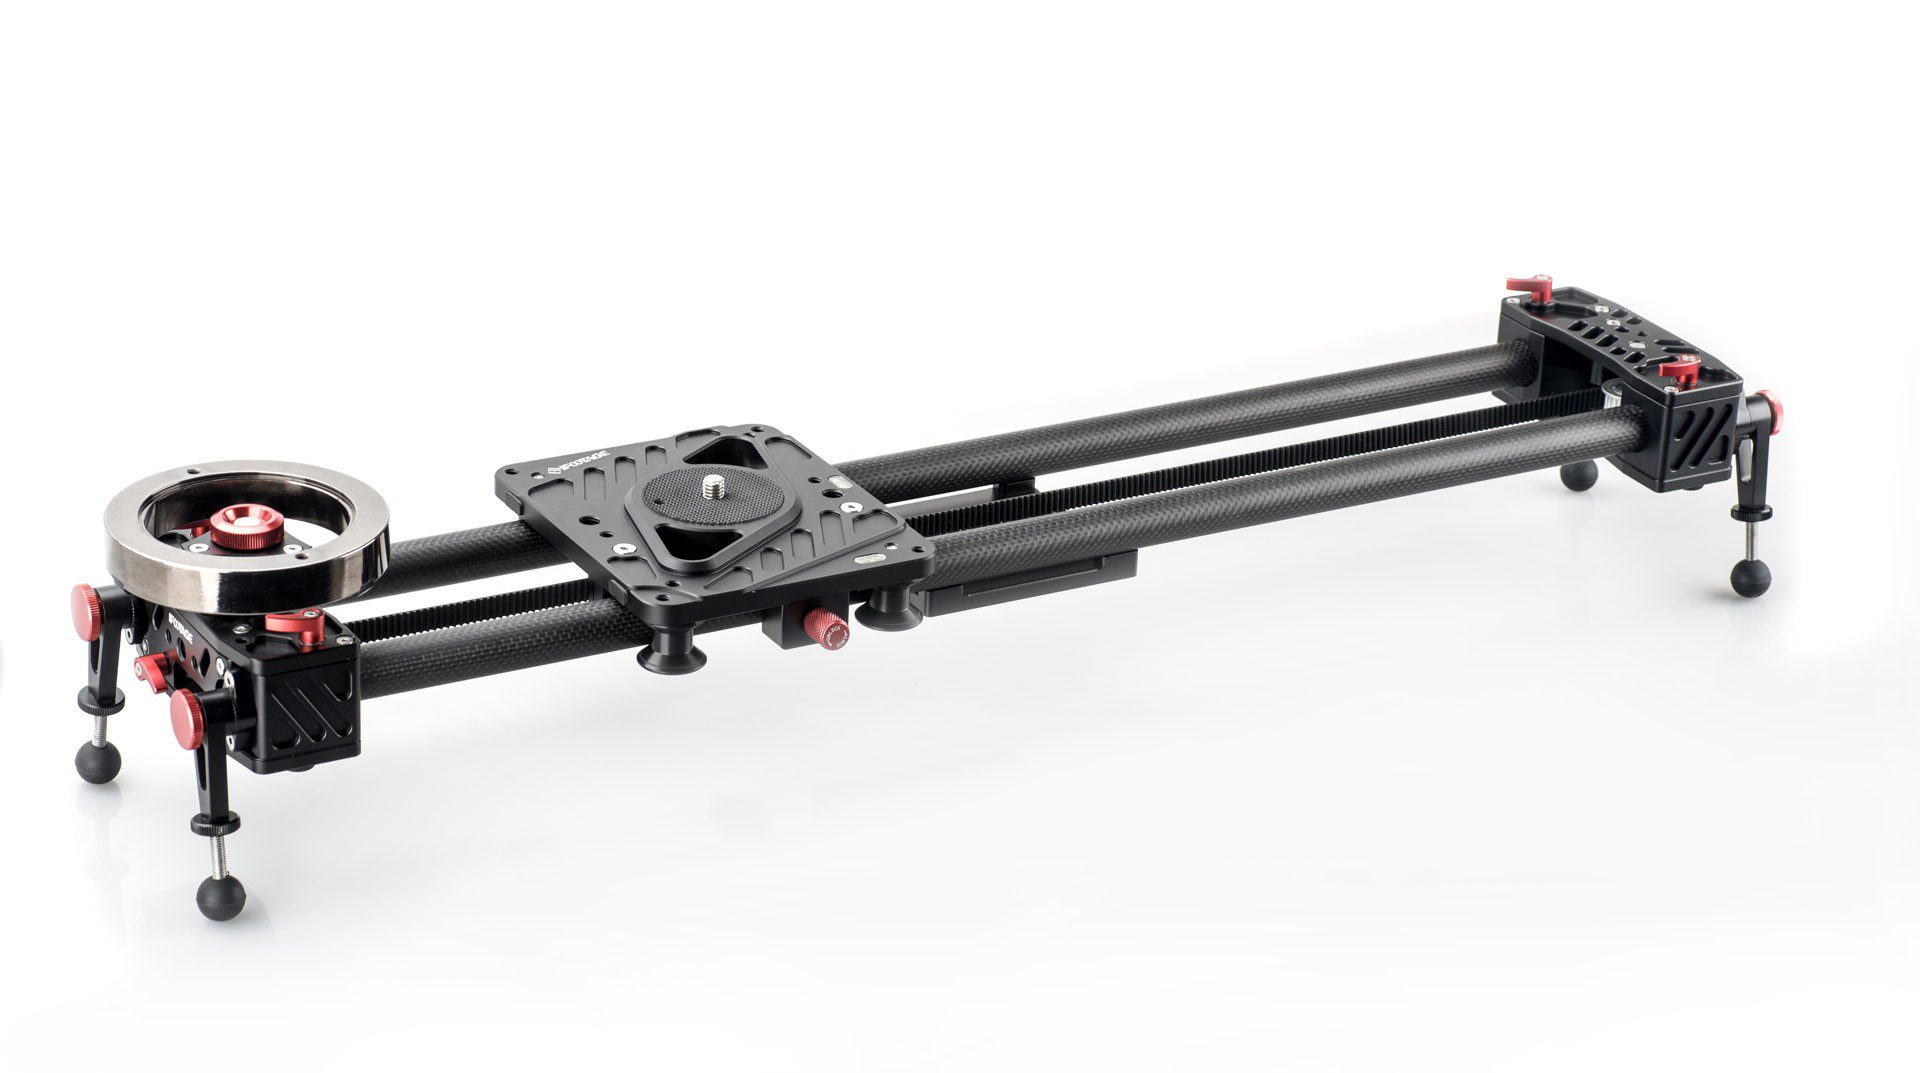 iFootage Shark Slider S1 Bundle (with extension up to 135cm)